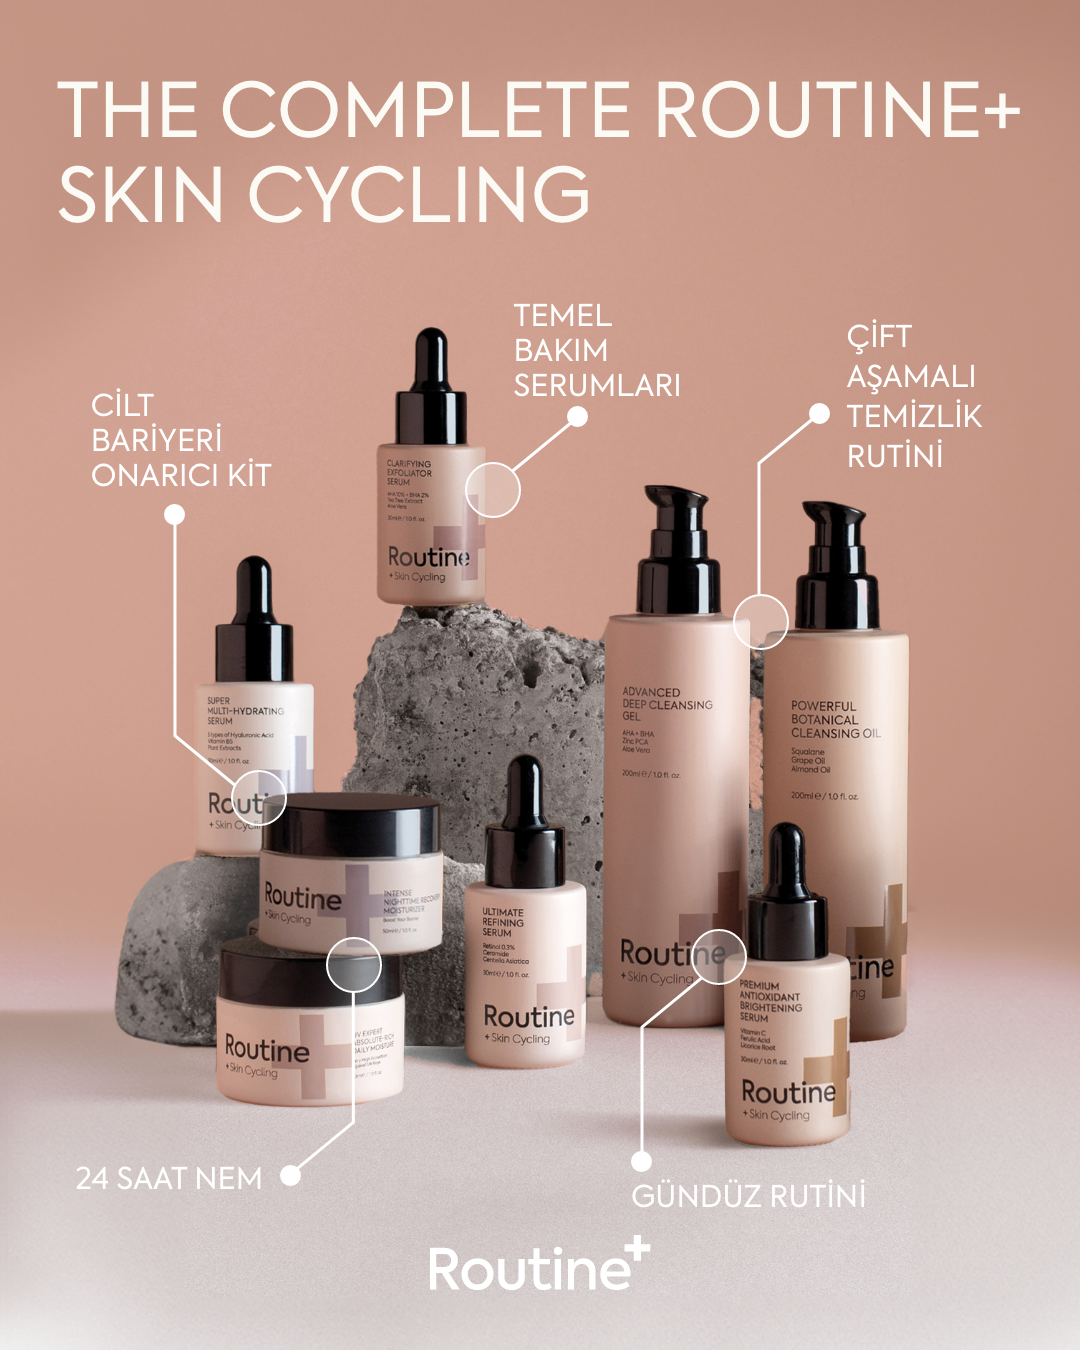 Skin Cycling: The New Trend Revolutionizing Skincare